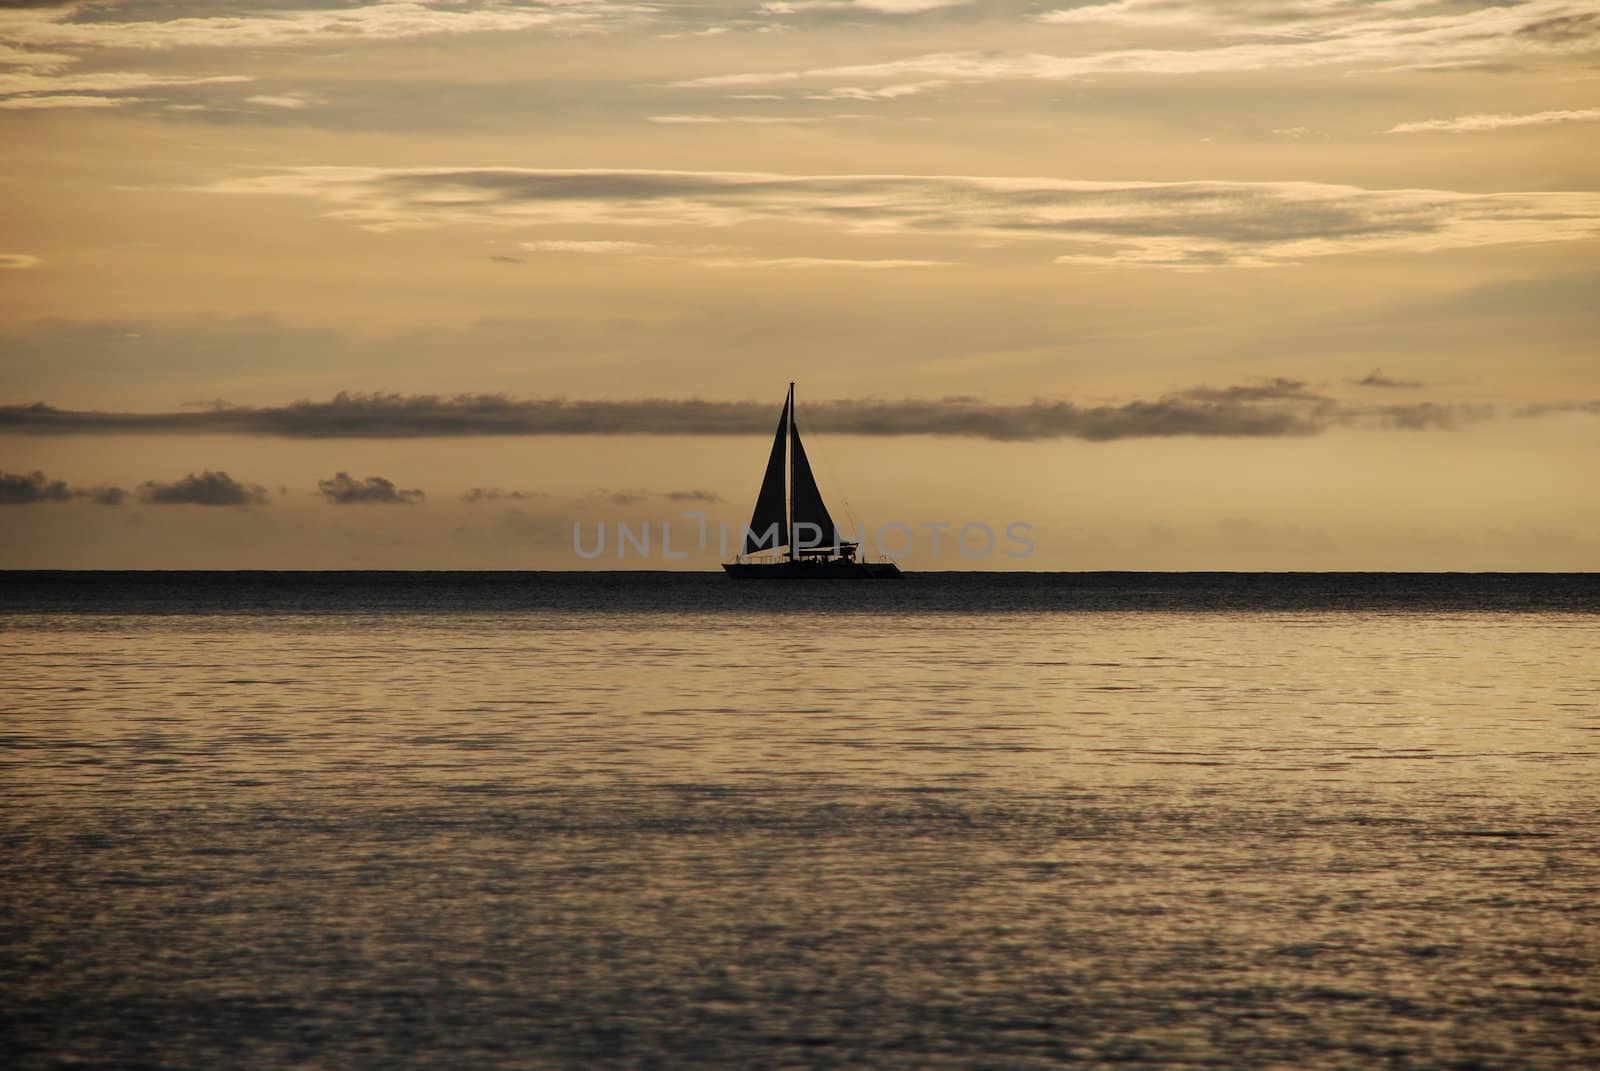 Sailing boat on the sea at sunset







Sailing boat and catamaran on the horizon as the sun goes down